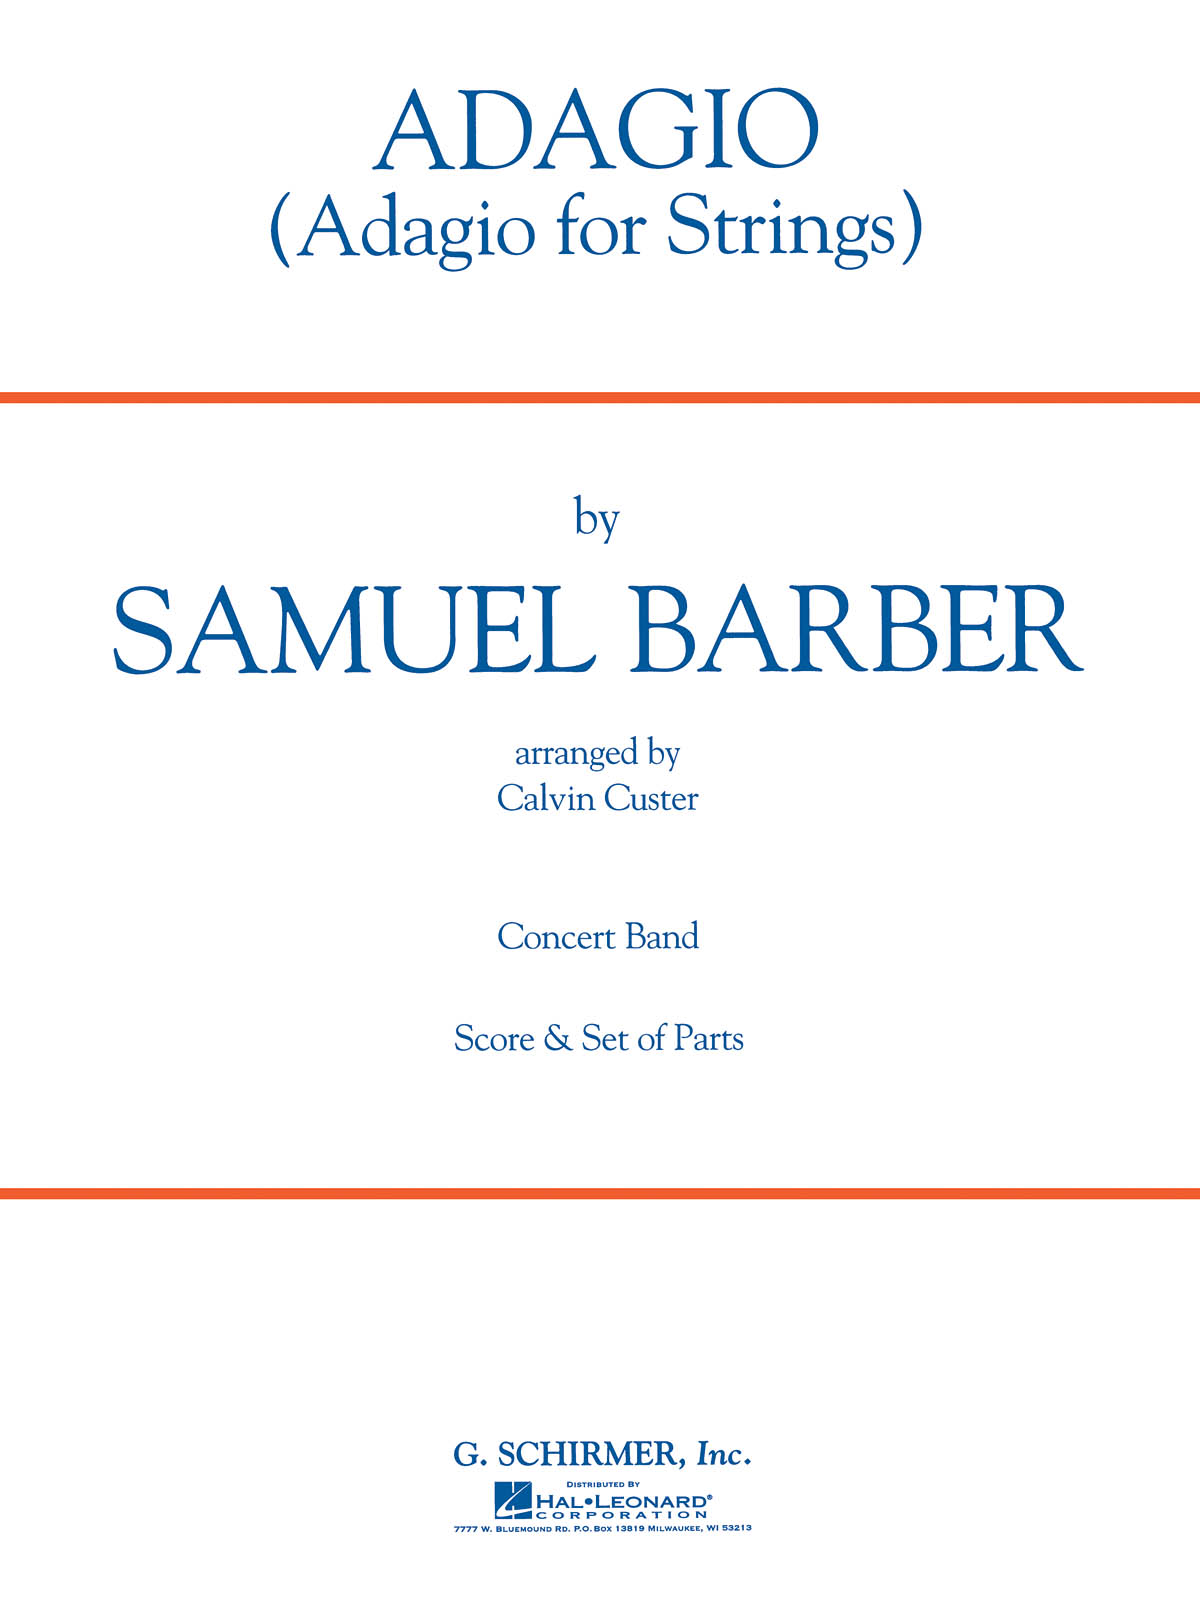 Samuel Barber: Adagio for Strings: Concert Band: Score and Parts